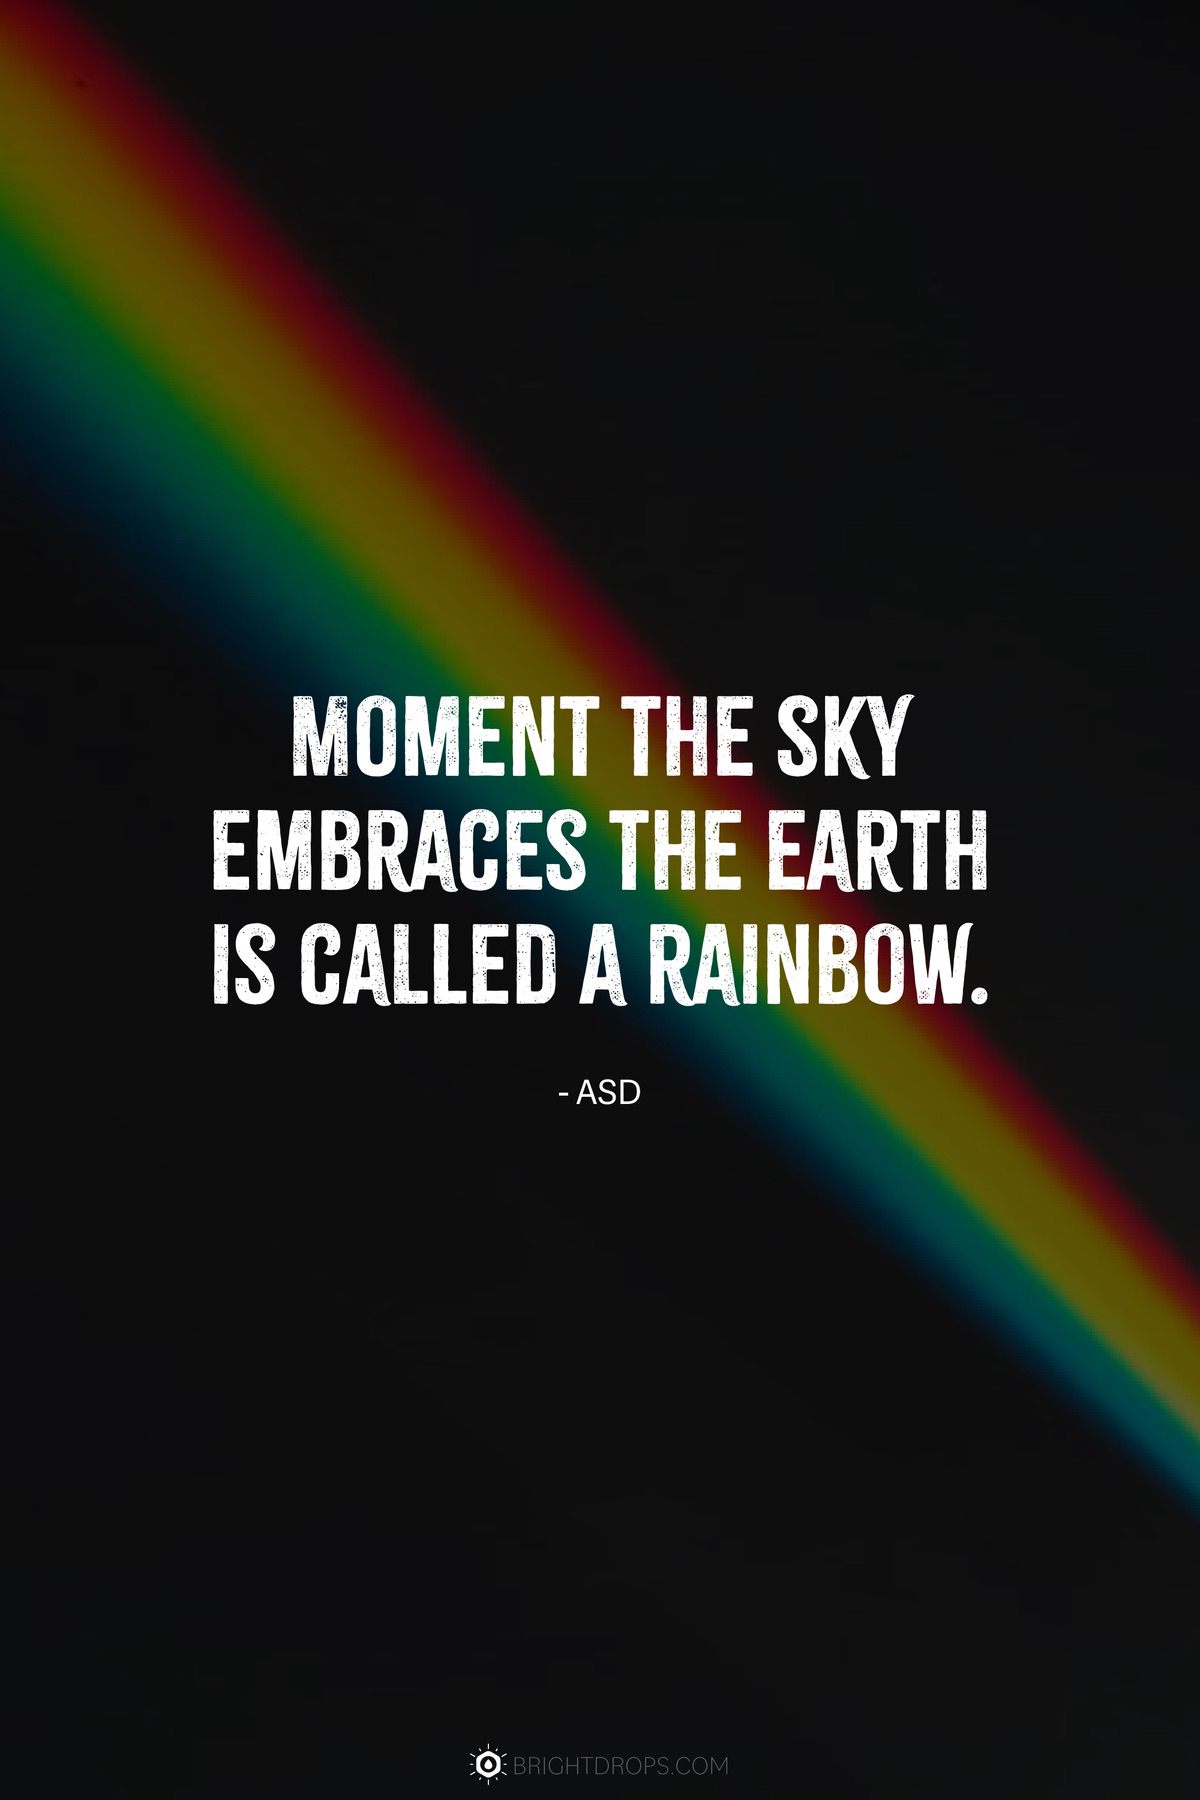 Moment the sky embraces the earth is called a rainbow.